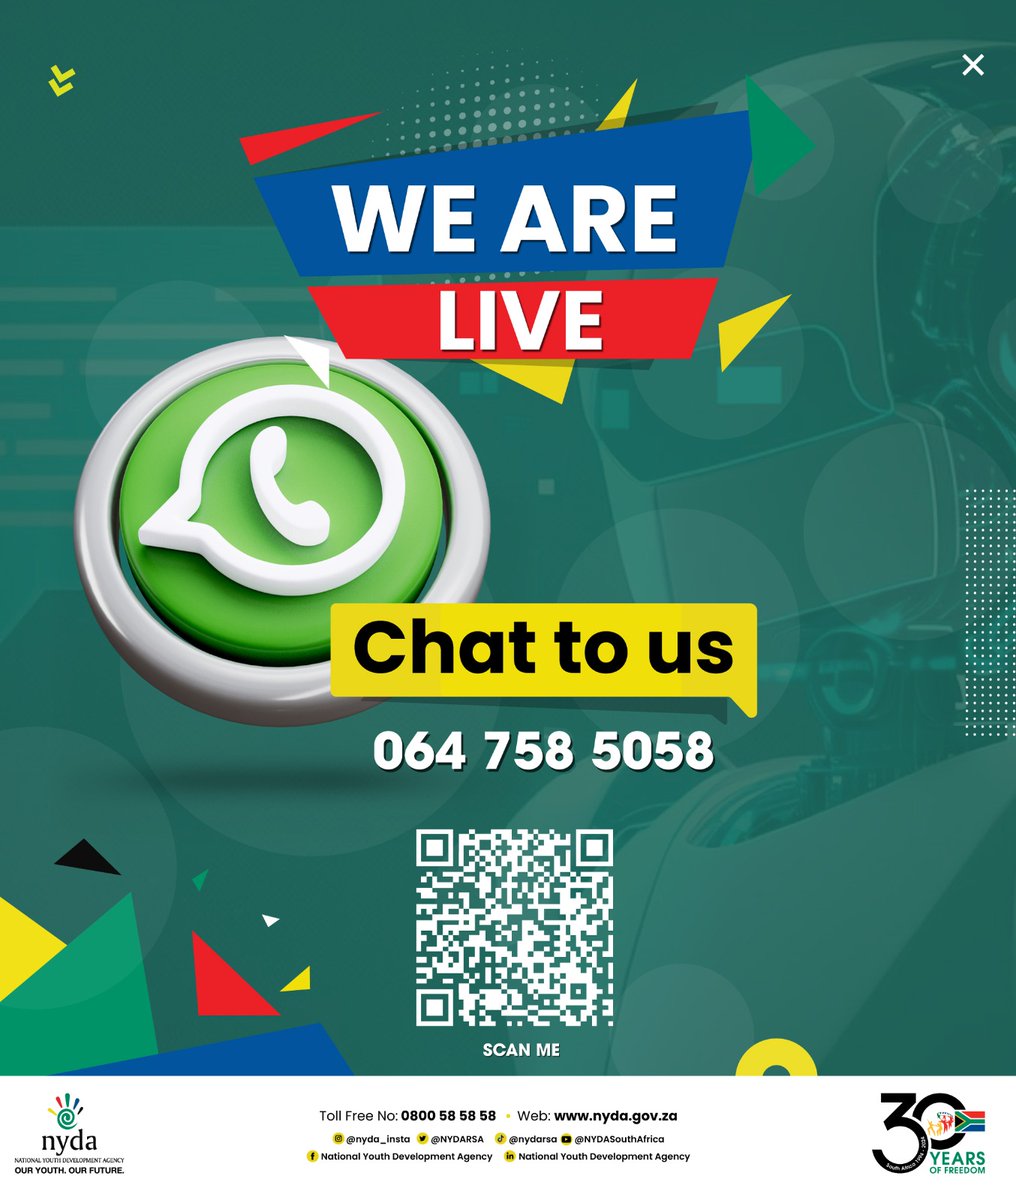 The NYDA is committed to modernising its service delivery and adapting to evolving communication trends. WhatsApp reduces the need for expensive phone calls or in-person visits, while also minimising the time and resources required to address young people’s inquiries and…